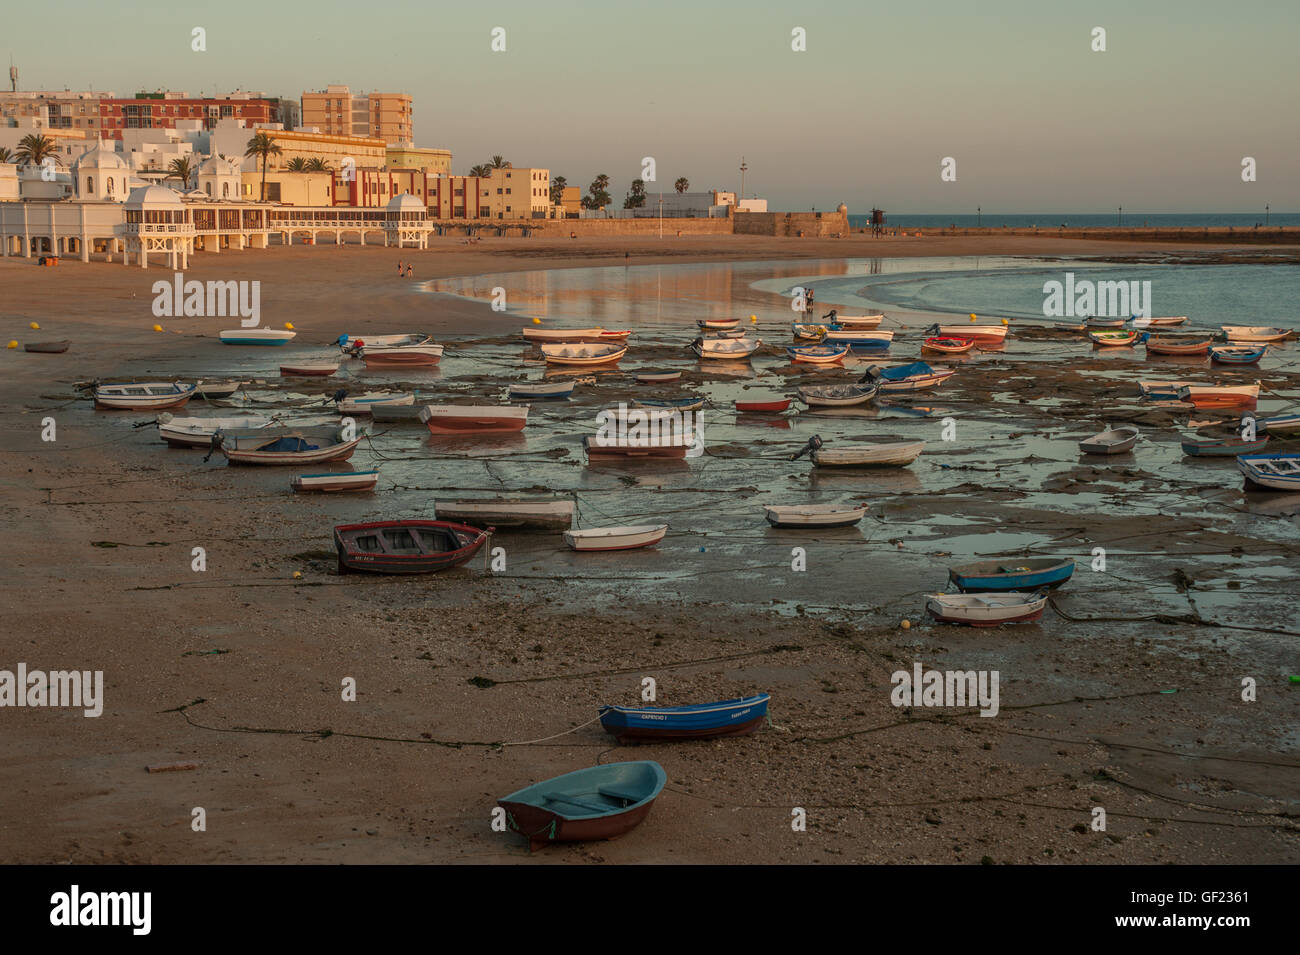 View of the Caleta beach in the Old Town of Cádiz, at sunset. Stock Photo